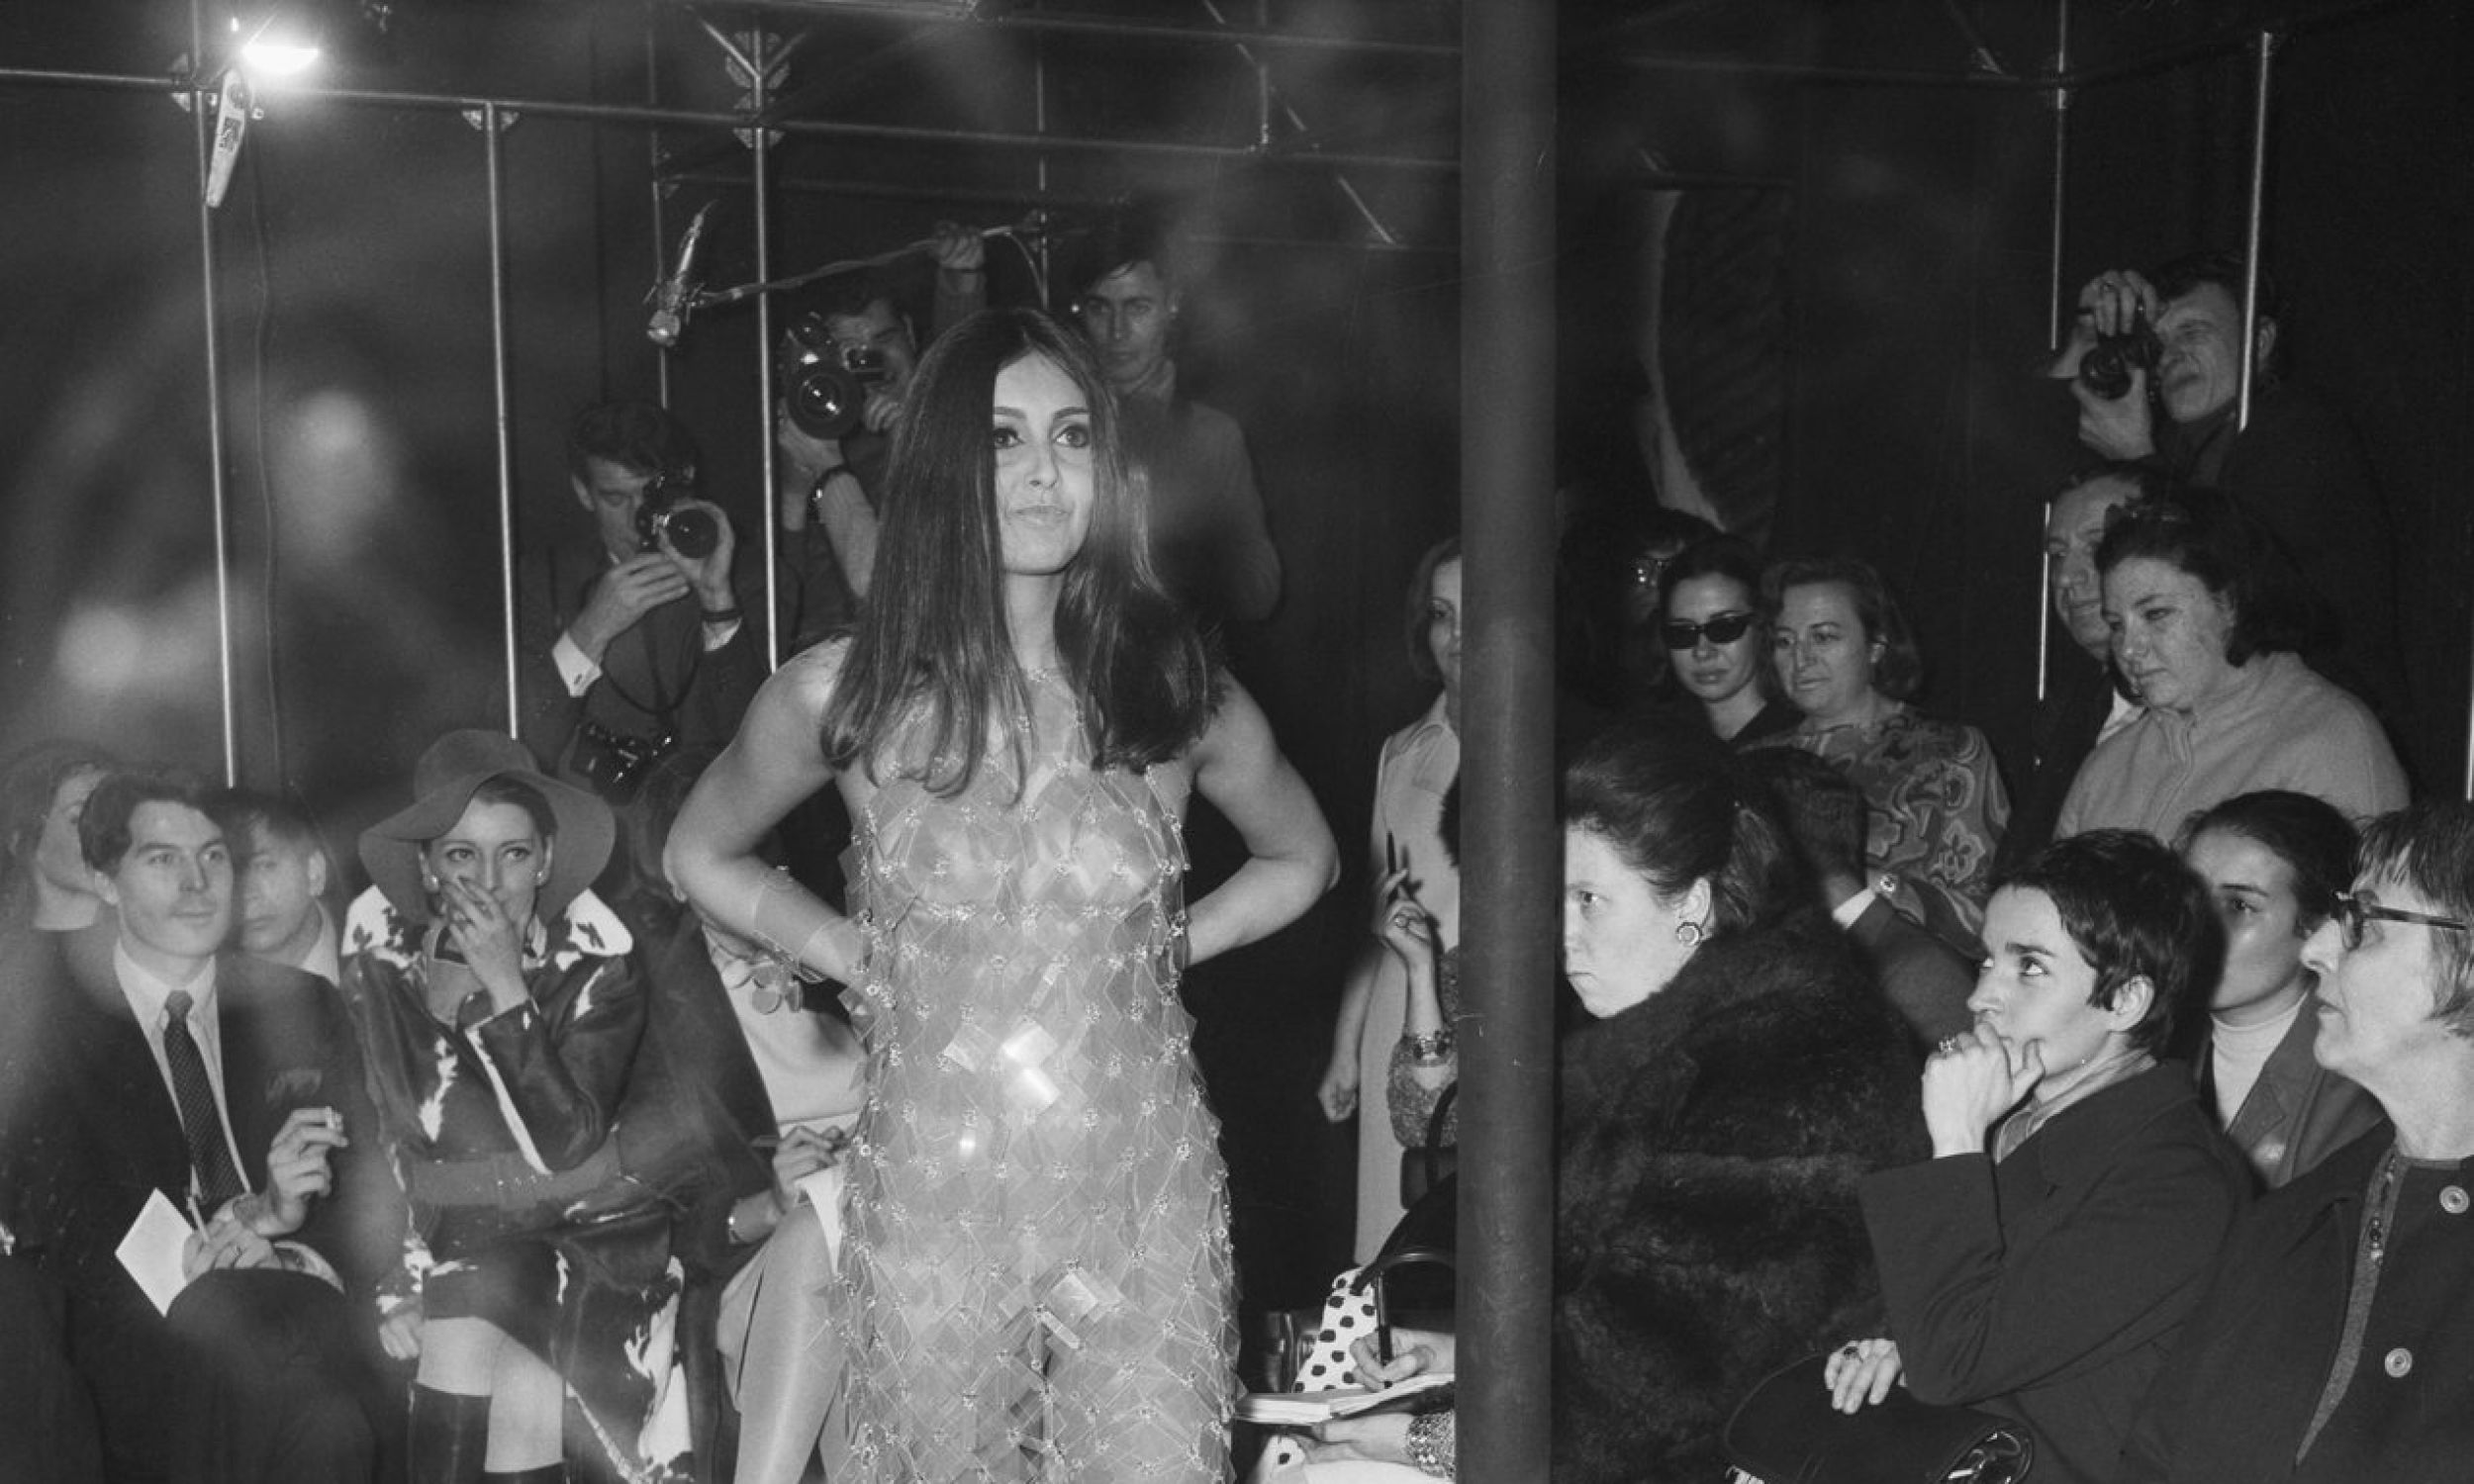 1967: Model in semi-transparent dress. Outfit show from Paco Rabanne's spring/summer collection. Photo: UPI PHOTO/Getty Images